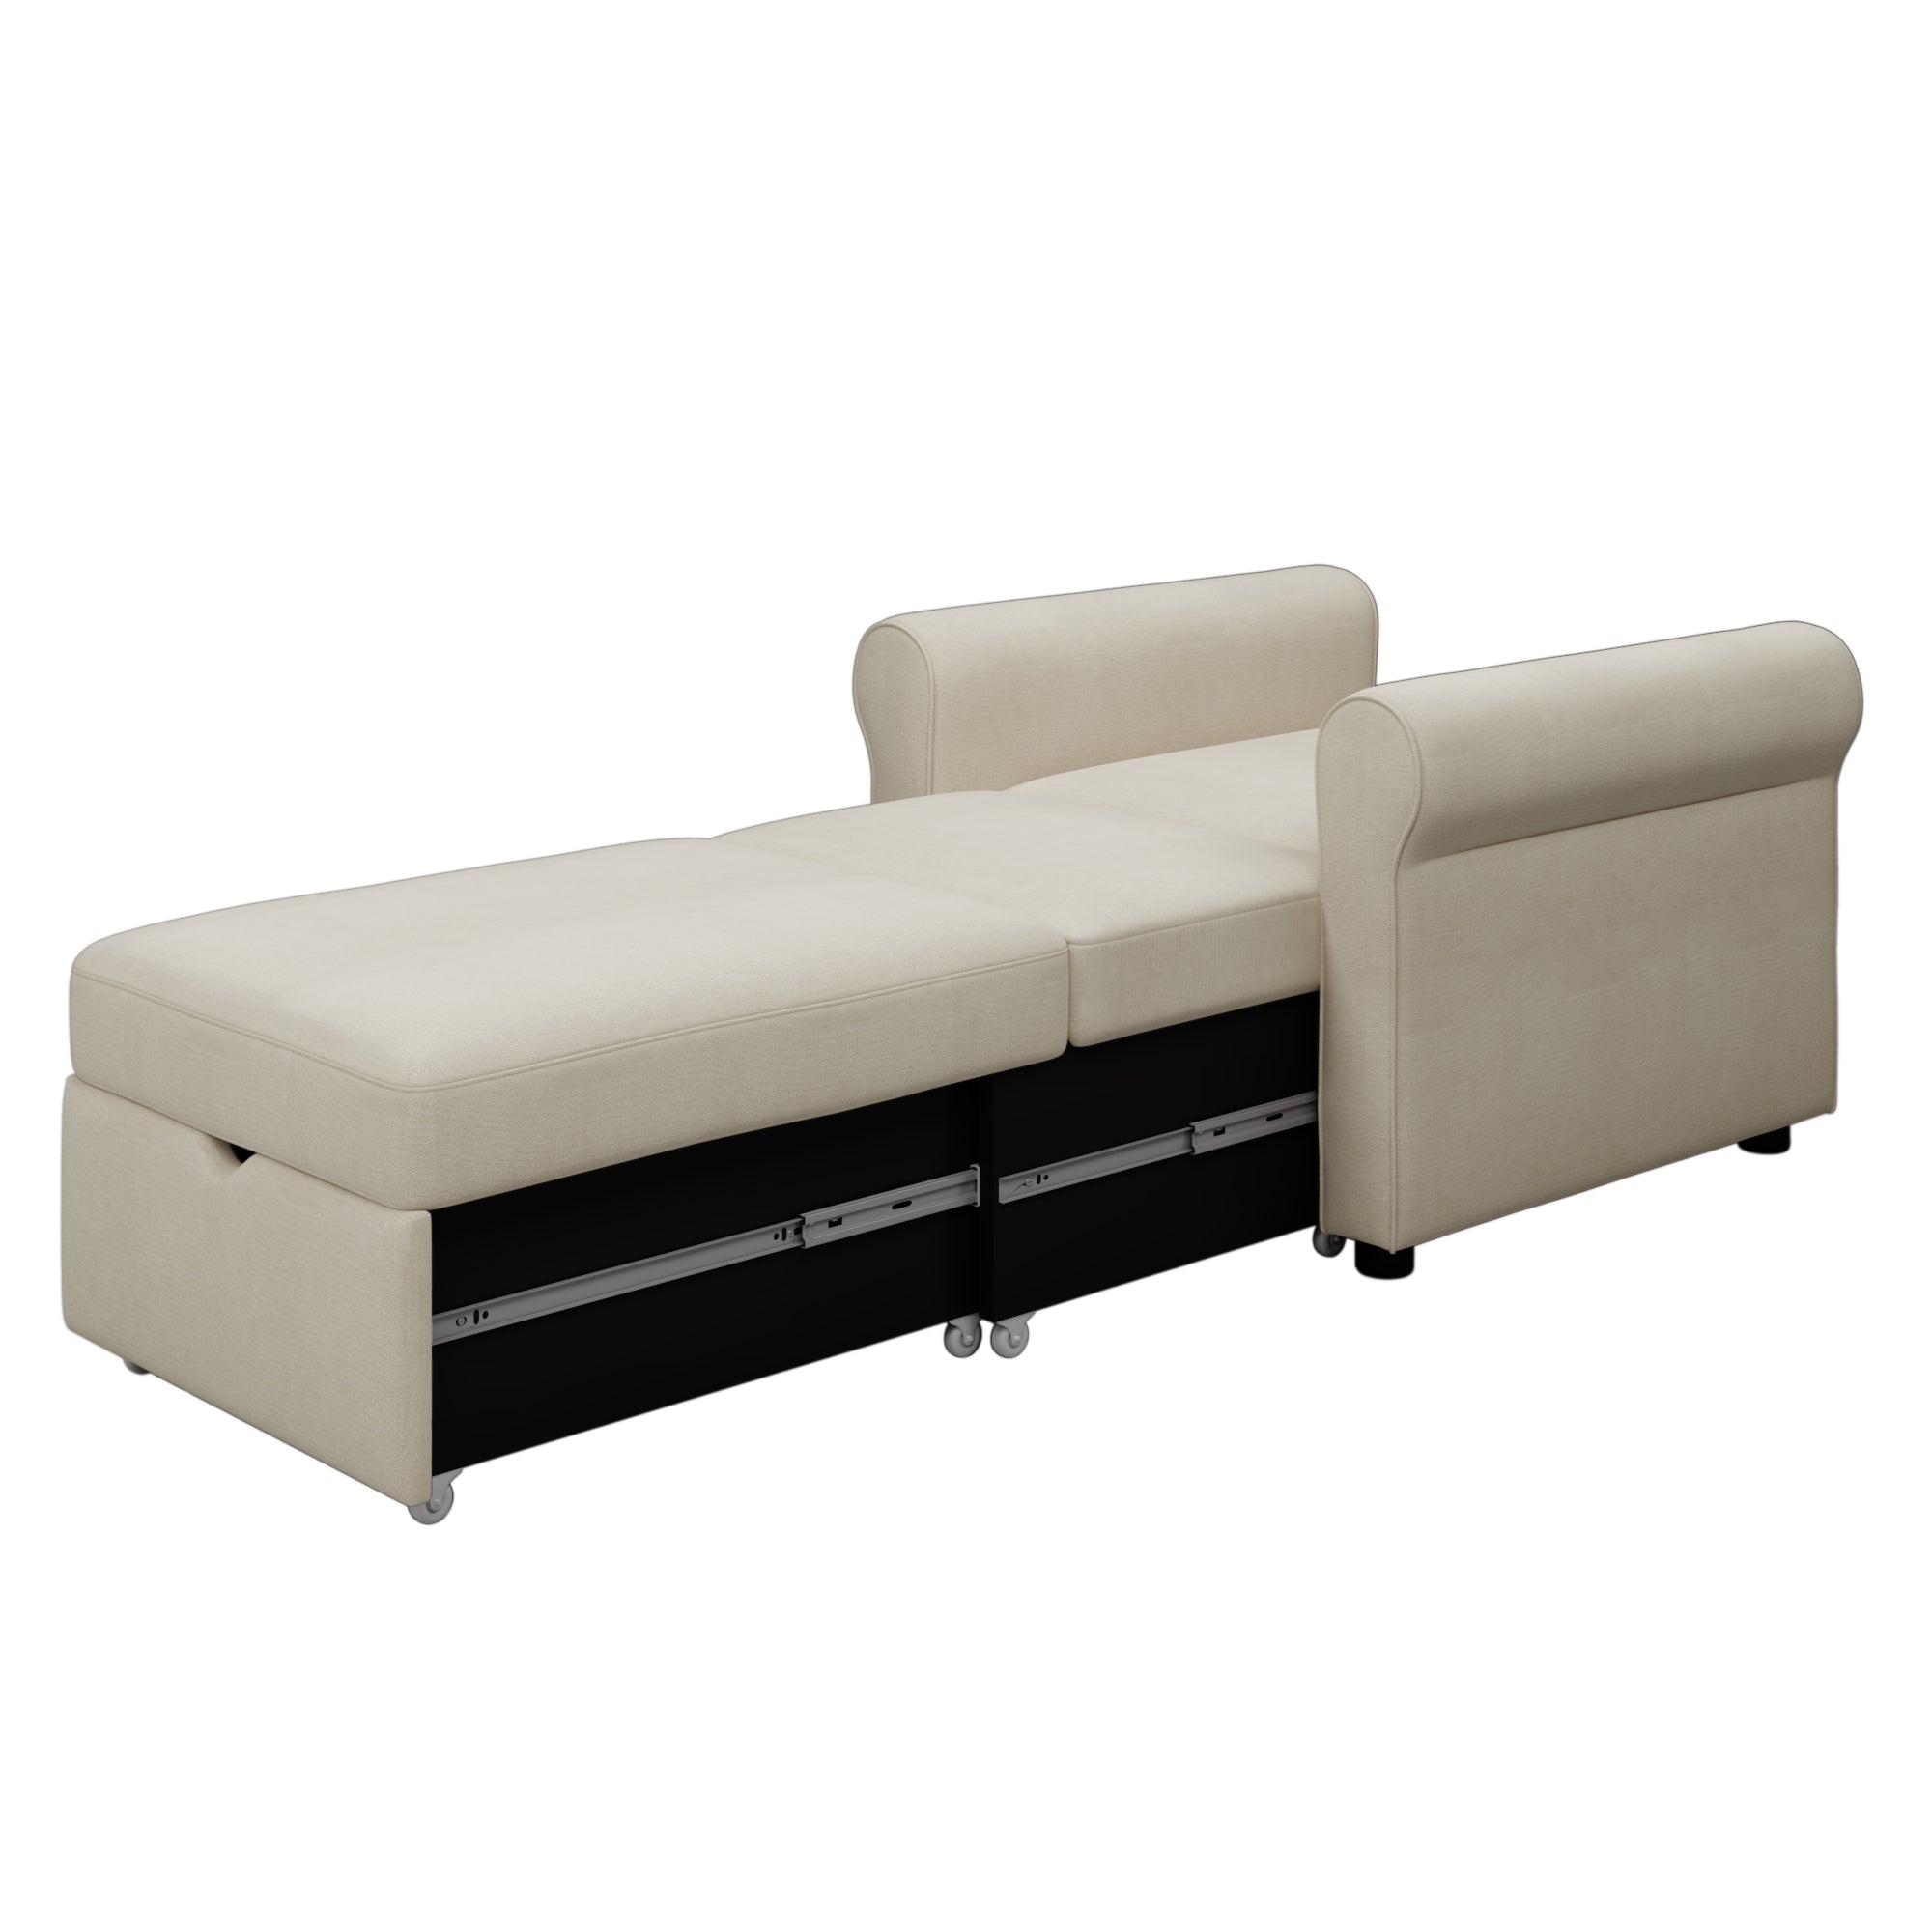 2 in 1 Sofa Bed Chair (Beige)